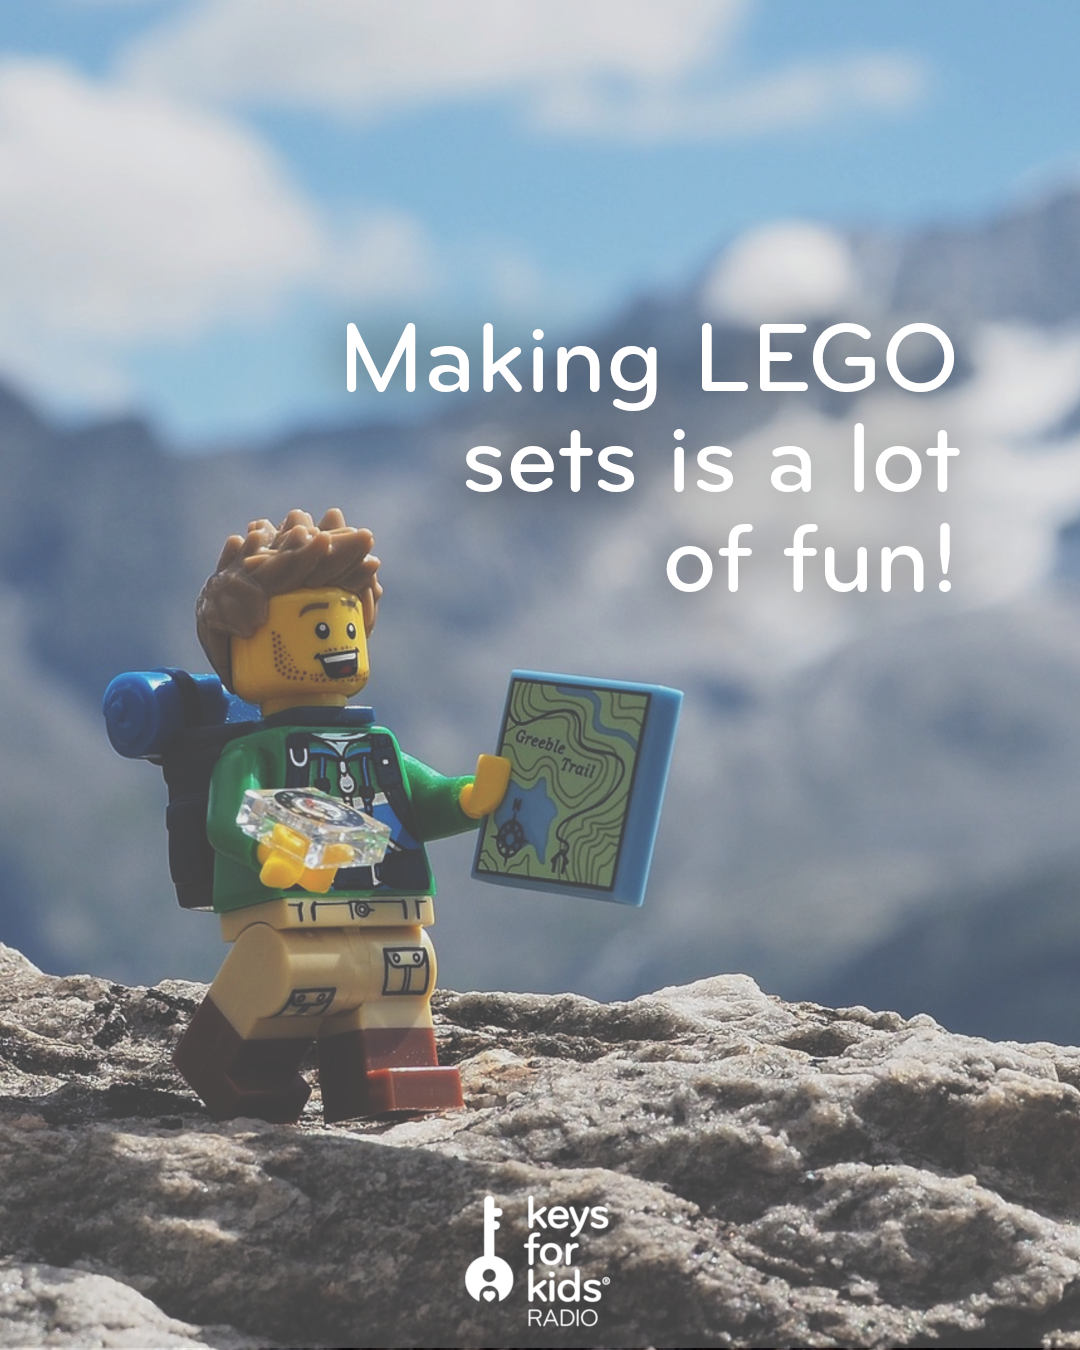 Where Do LEGO Sets Come From?